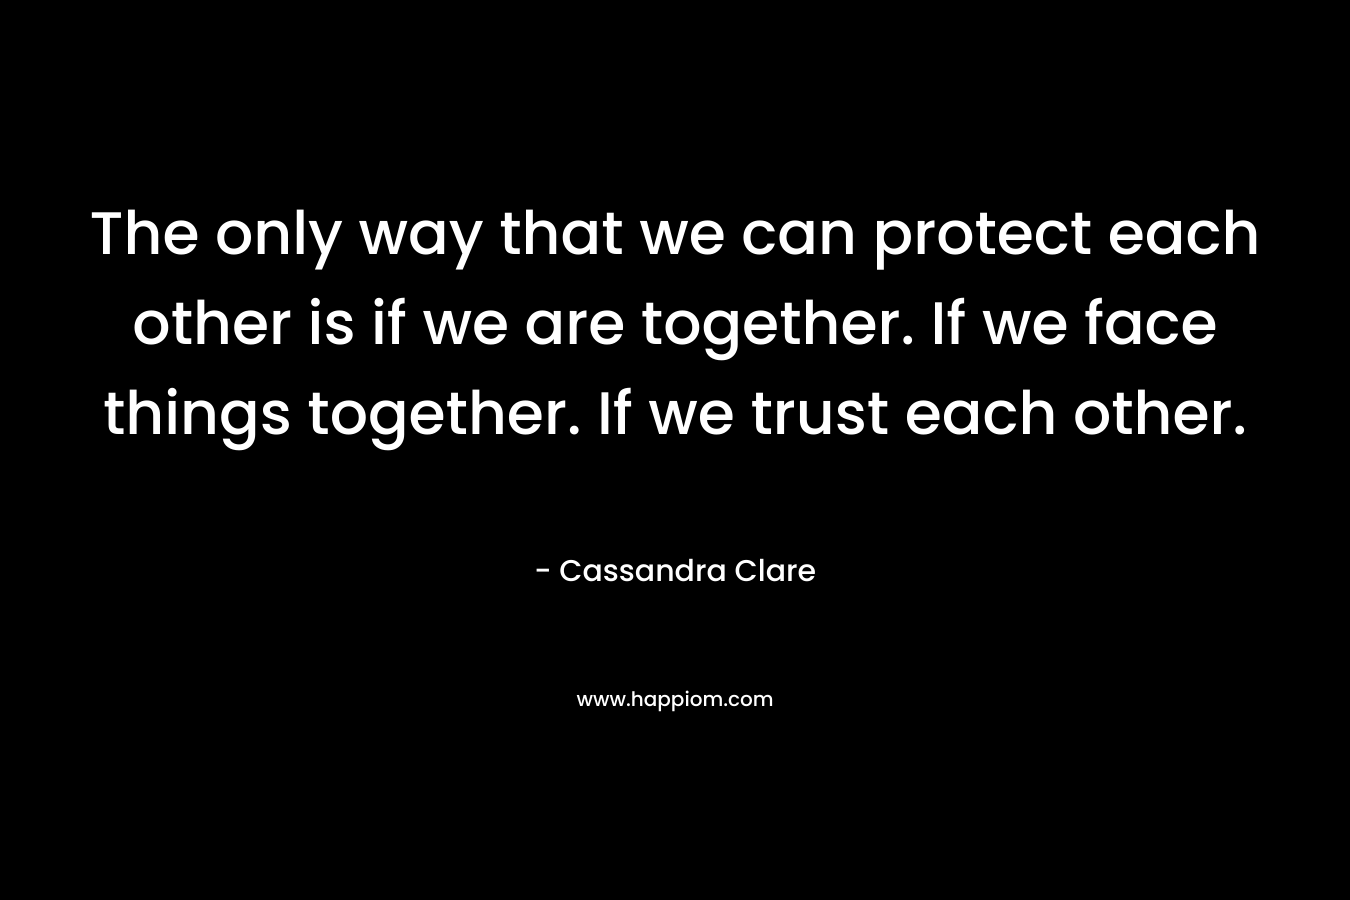 The only way that we can protect each other is if we are together. If we face things together. If we trust each other.